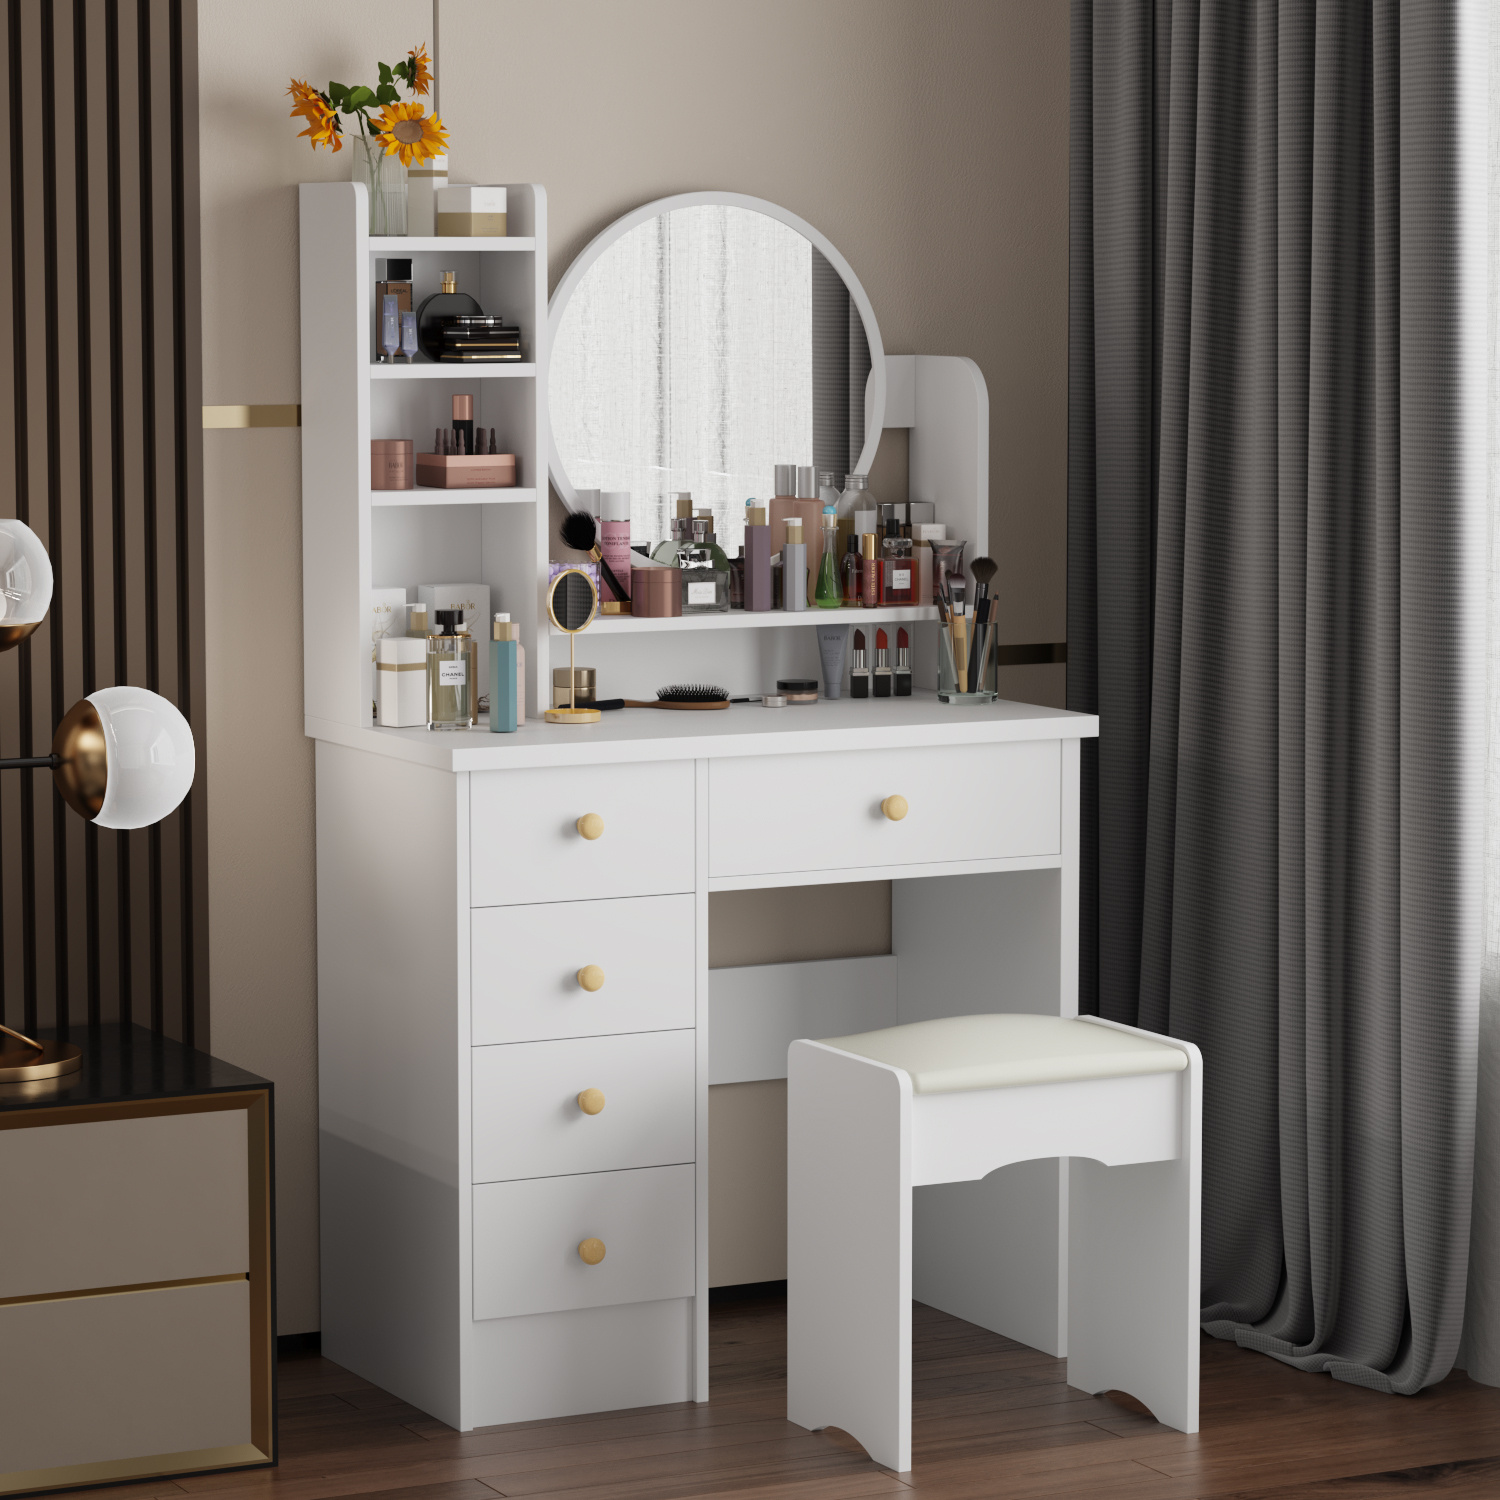 

1pc Modern Vanity Set With Round Glass Mirror, Bedroom Makeup Dressing Table With Metal & Wooden Drawers, Stylish Furniture For Girls